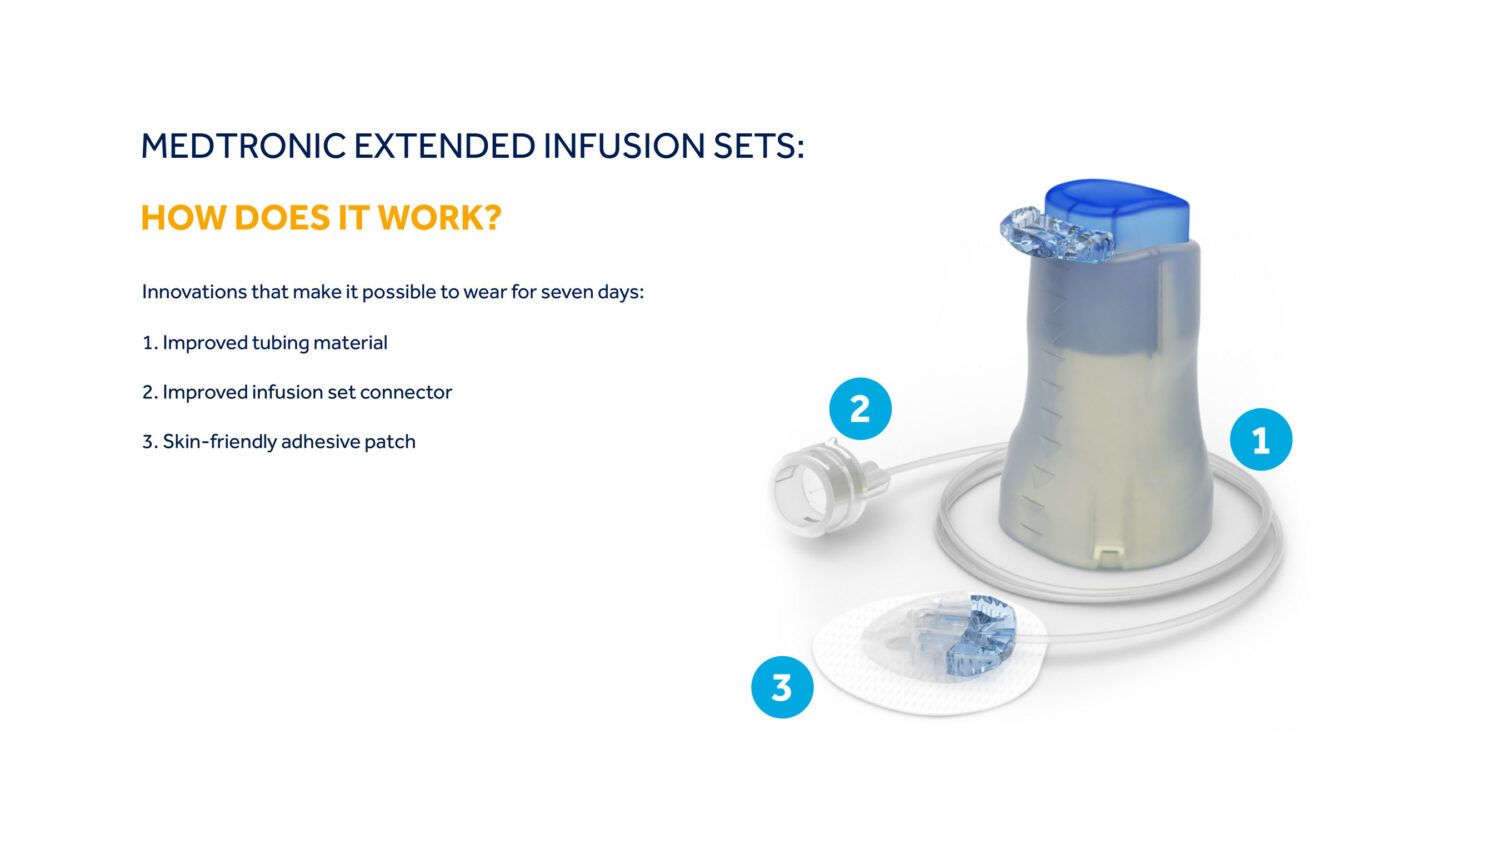 Medtronic Launches World’s First 7-Day Wear Infusion Set to Reduce Burden for People with Diabetes